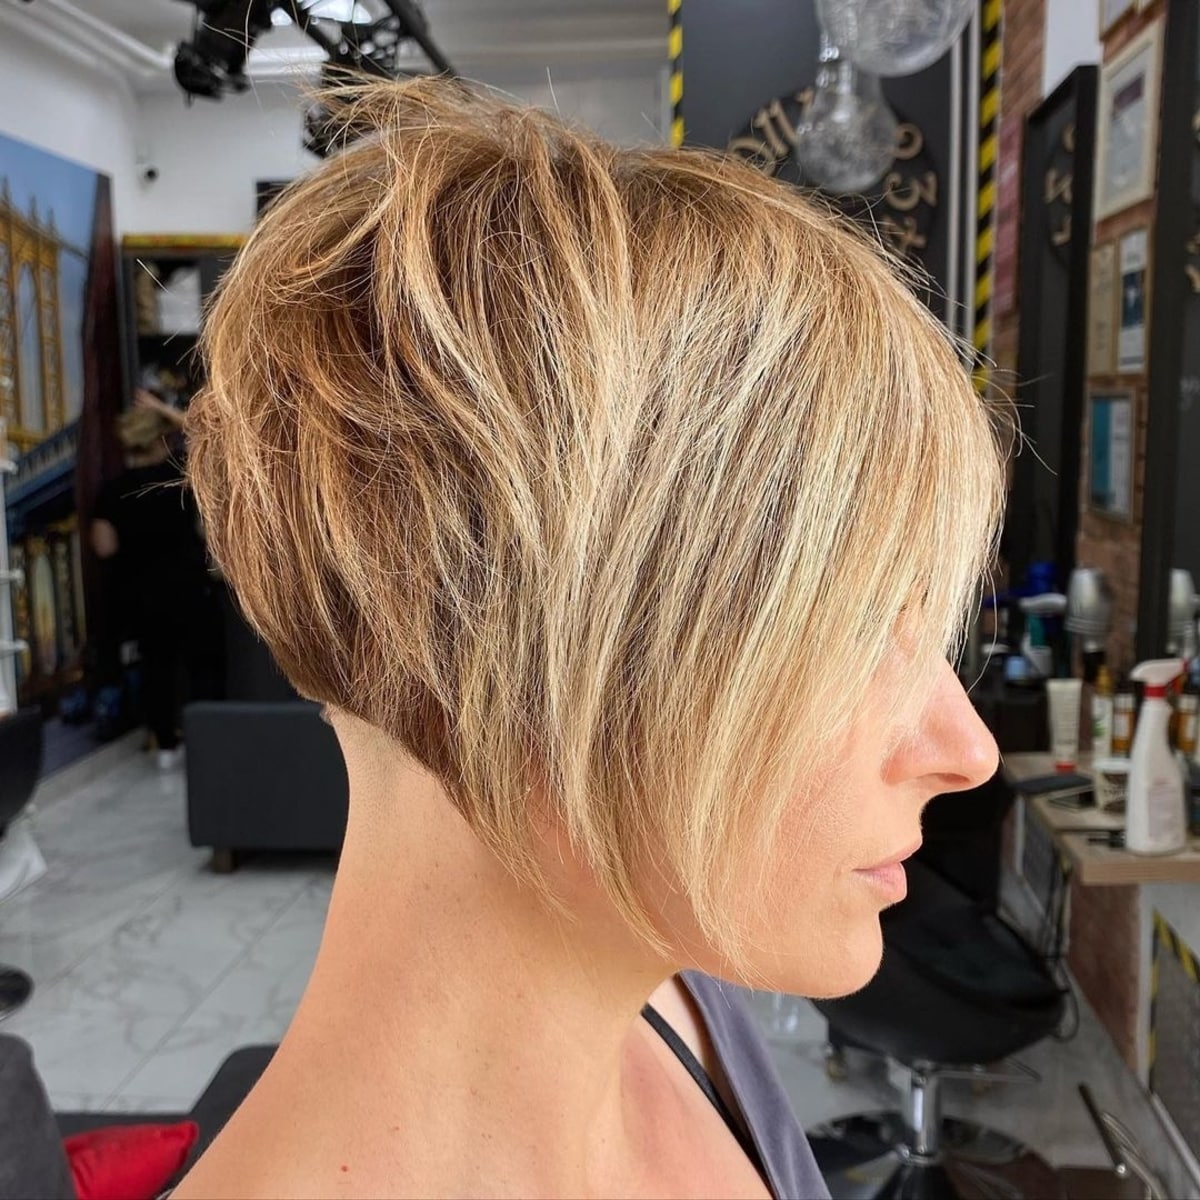 Short Stacked Pixie Haircut